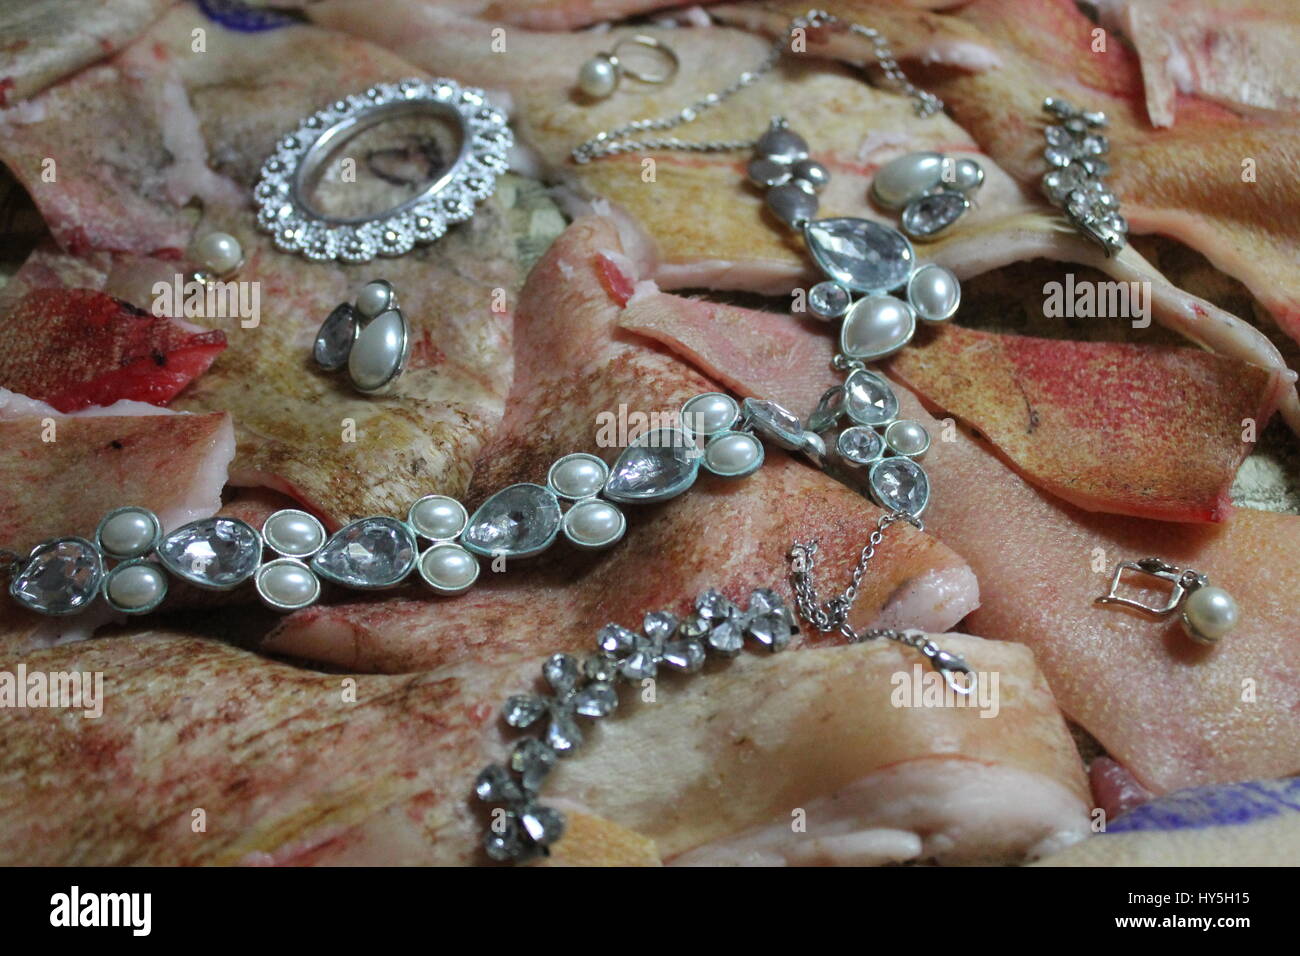 beautiful jewerly goods from pearl lay on fresh pink pork skin Stock Photo